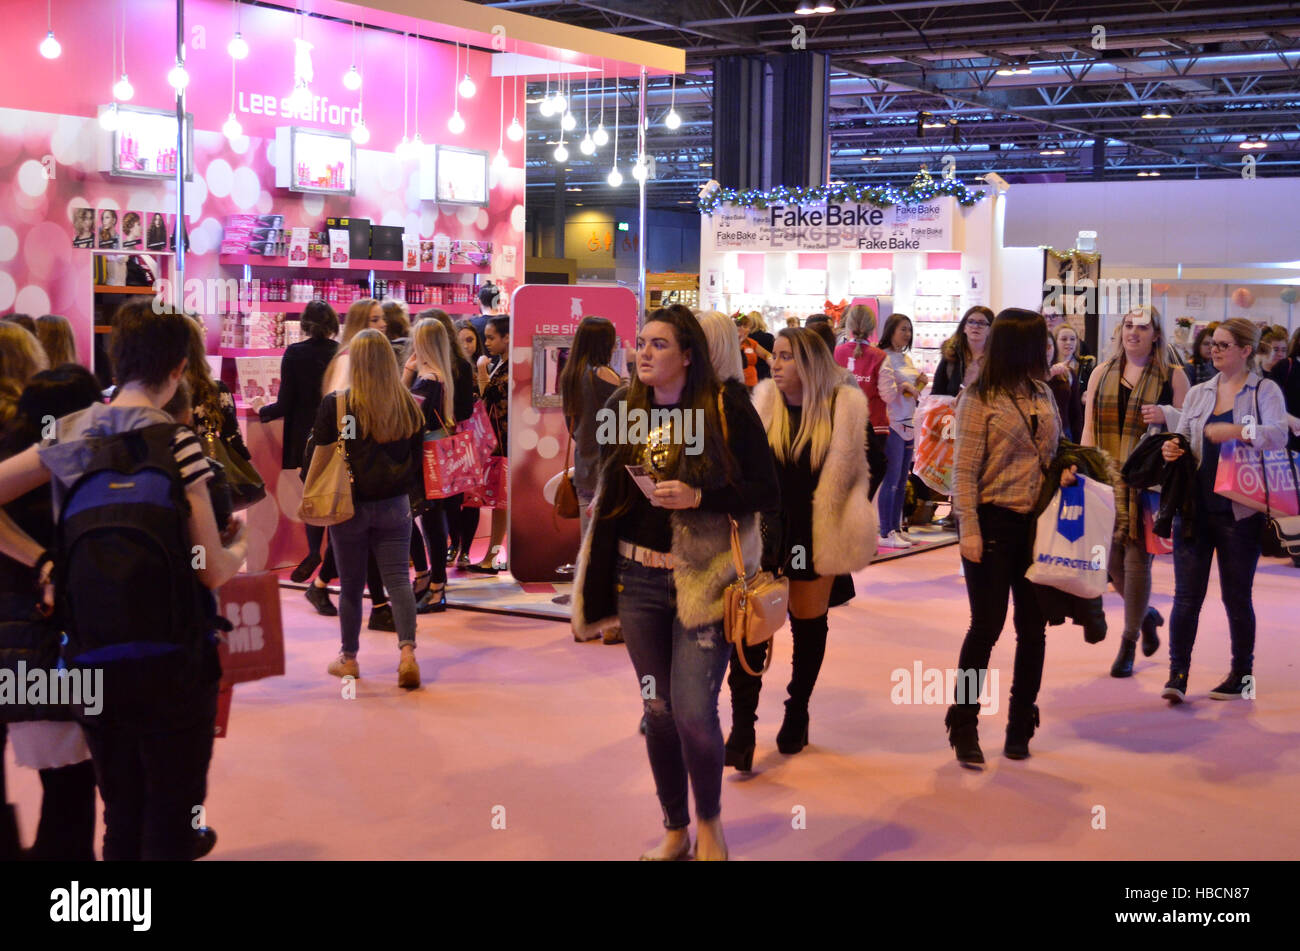 Vistors browse the fashion and beauty stands during the last day of The Clothes Show, NEC, Birmingham, UK. Running from 2-6 December 2016, with the usual exciting mix of fashion, beauty, celebrities, music, and industry experts, The Clothes show was taking place for the final time at the NEC. After 27 successful years at the NEC, the Clothes Show will relocate to Liverpool in July 2017. Credit:  Antony Nettle/Alamy Live News Stock Photo